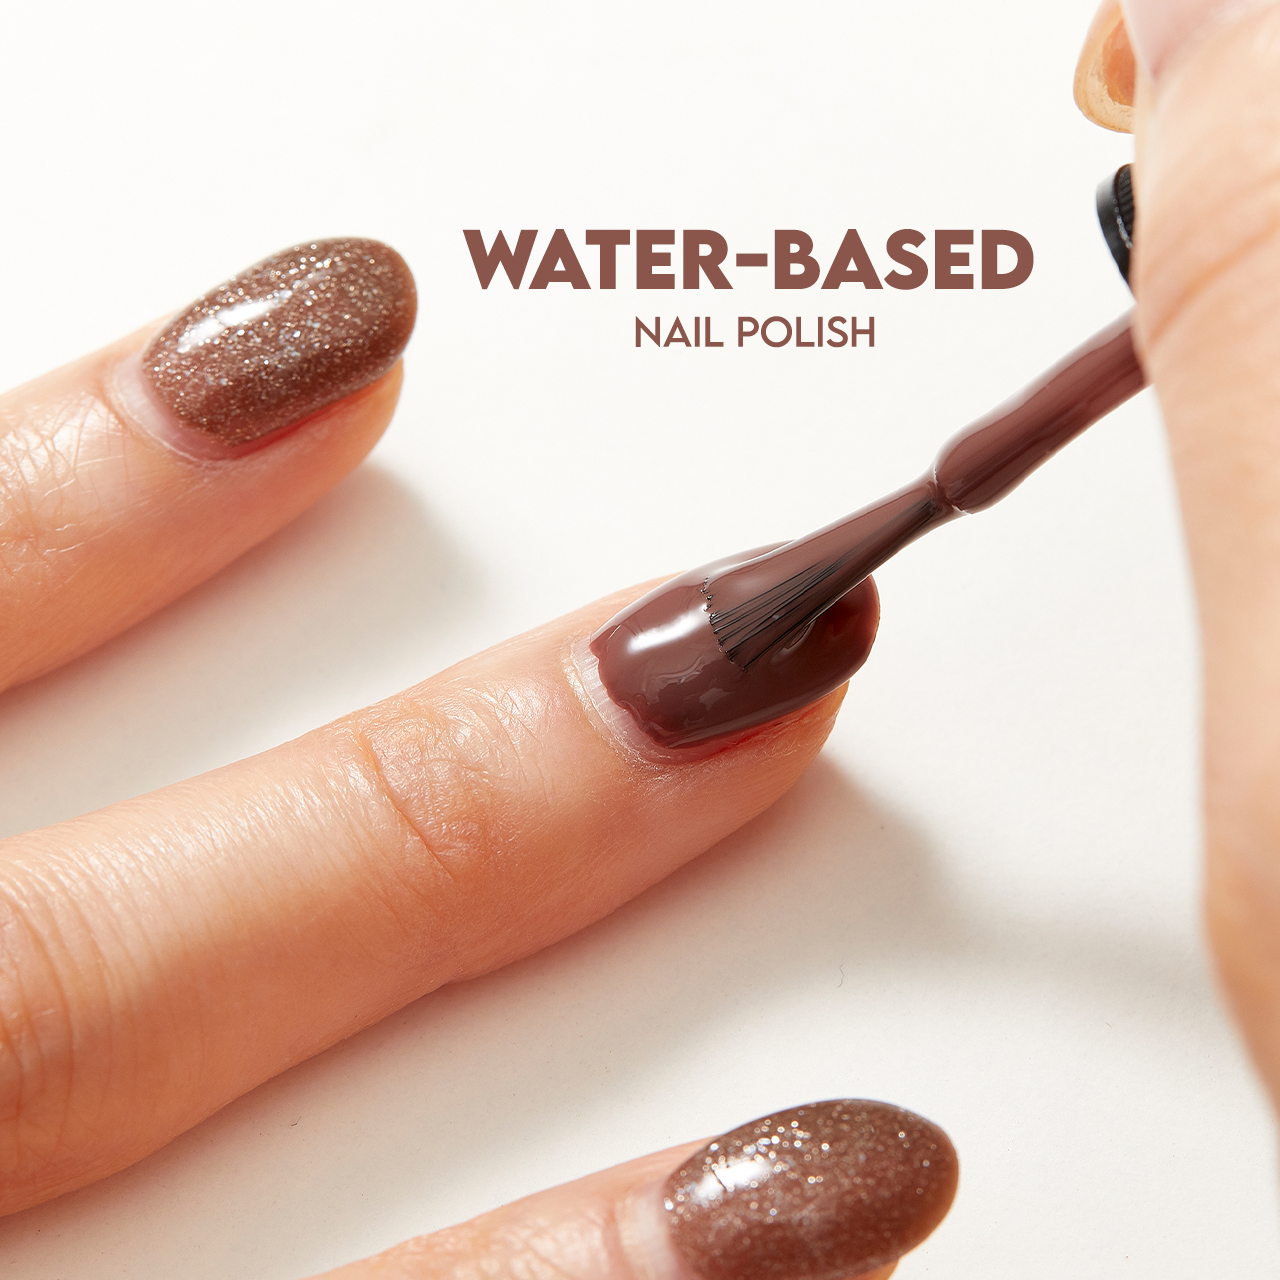 Amazon.com : Pluchke Water-based Halal Vegan-Certified Single Natural Nail  Polish | Non-toxic Oxygen & Water Permeable Breathable | Low-Odor  Cruelty-Free Brown color Nail Polish (Choco Brown, 0.24 fl oz) : Beauty &